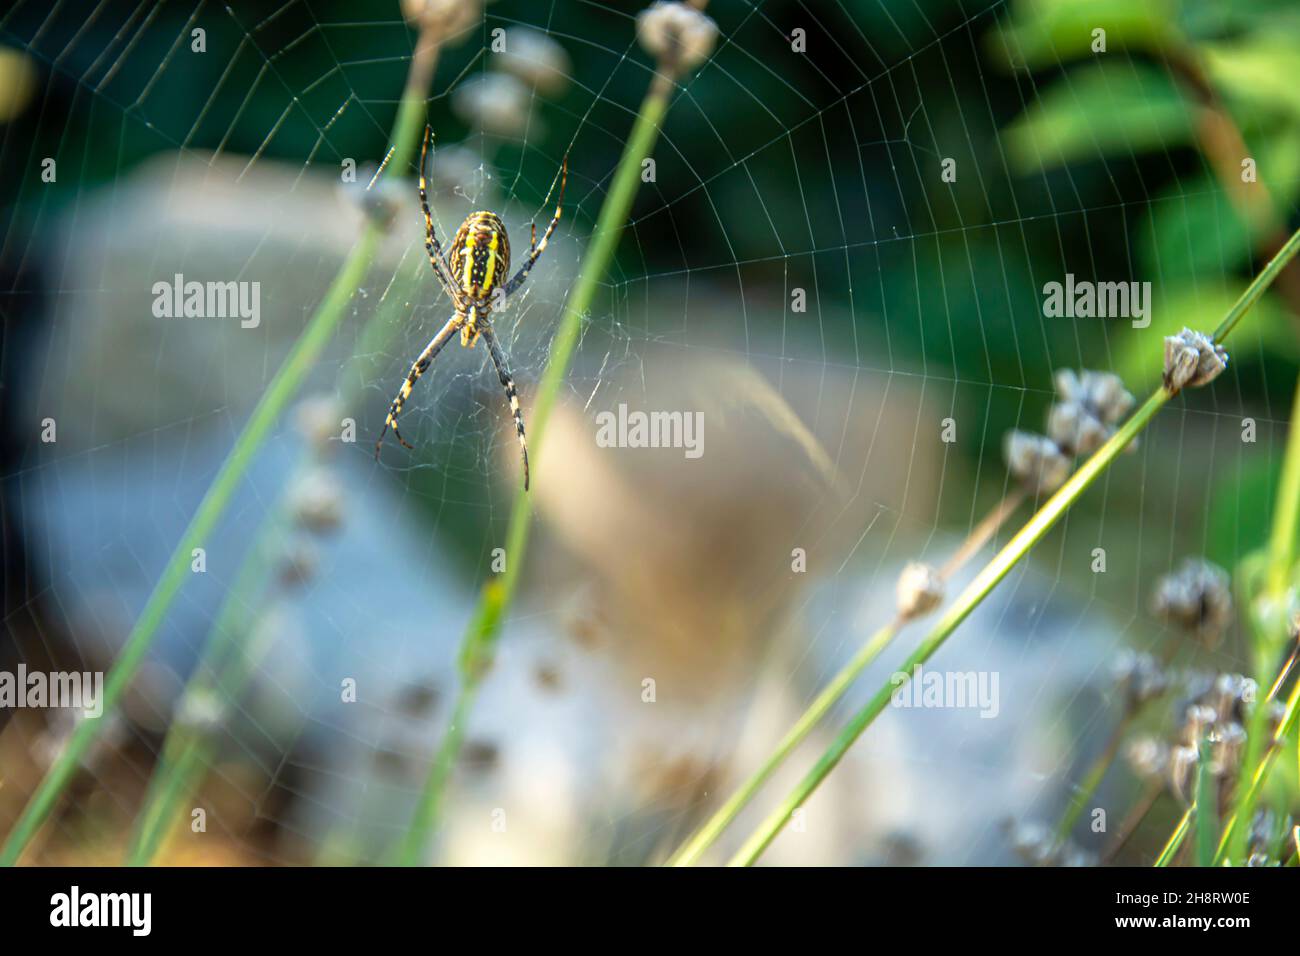 Garden yellow-black striped wasp spider on a spider web against a blurred garden background. High quality photo Stock Photo